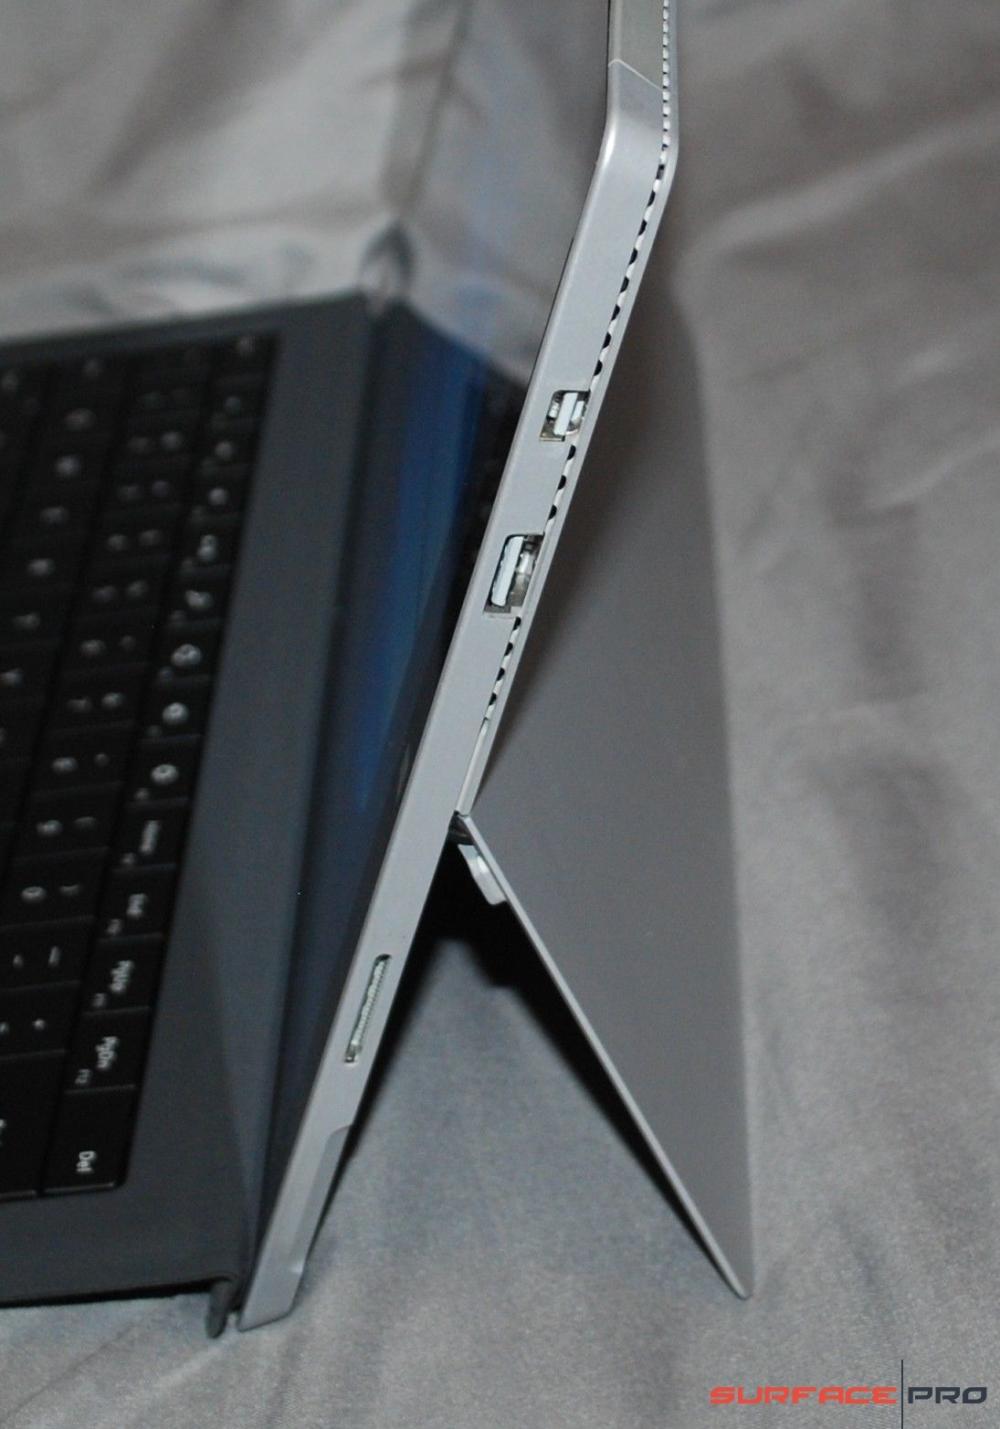 Surface Pro 3 ( i7/8GB/256GB ) + Type Cover